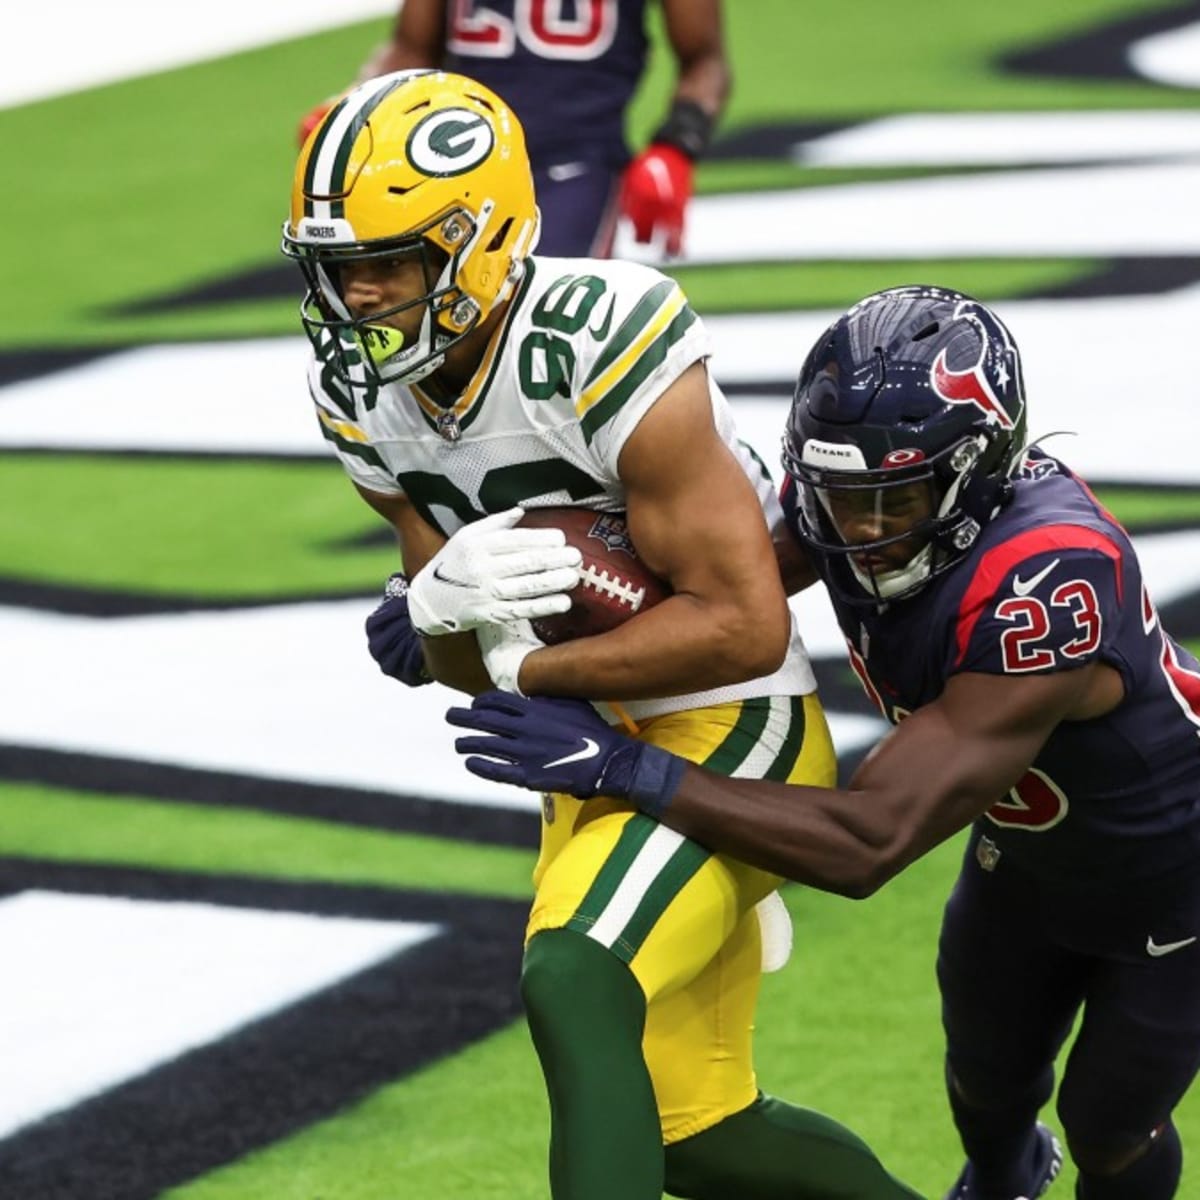 Texans-Packers Preseason 2021: Schedule, Game Time, TV Channel